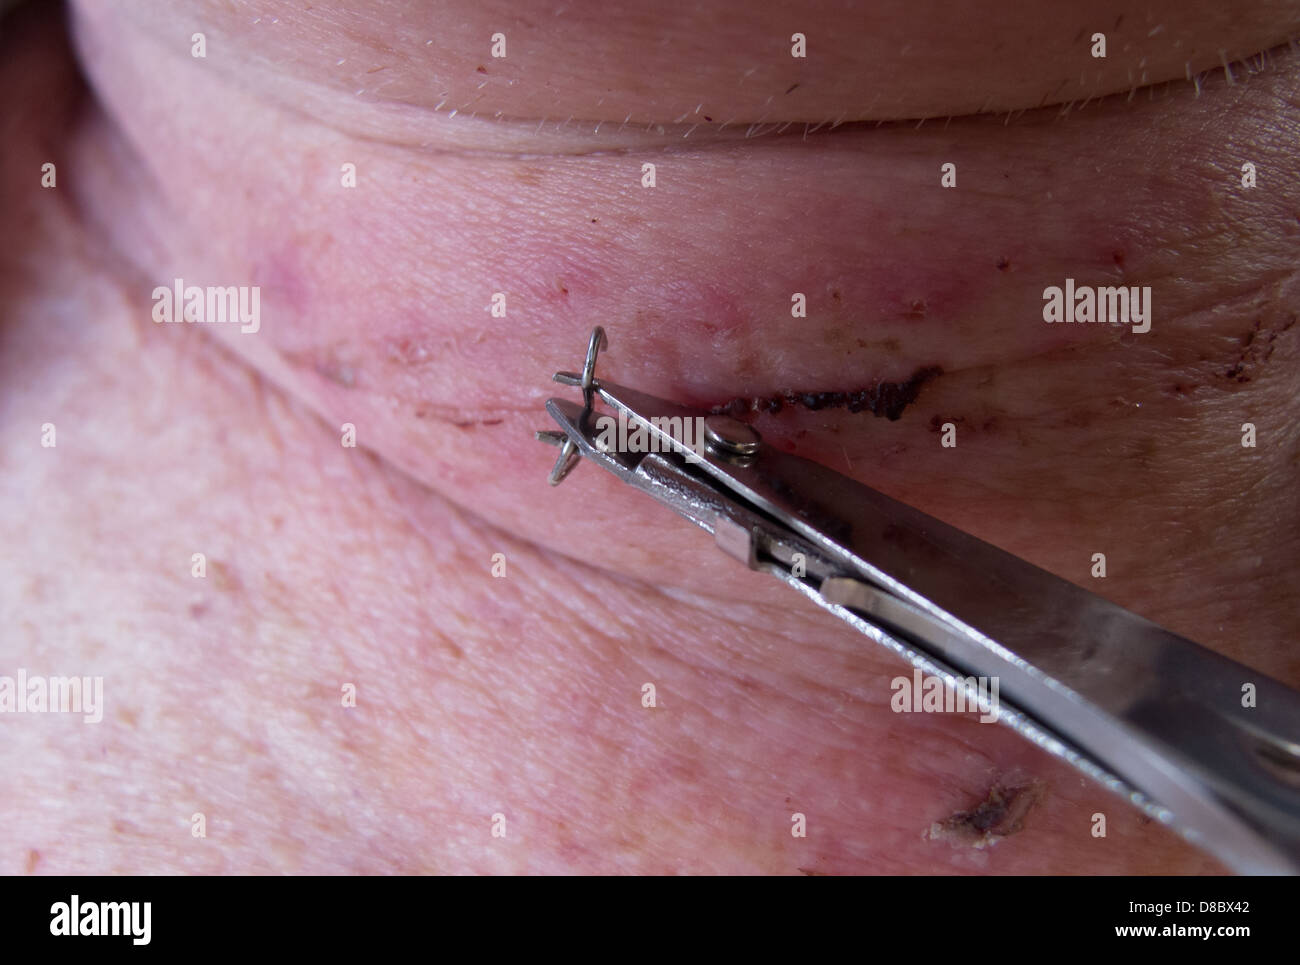 Surgical clip High Resolution Stock Photography and Images - Alamy